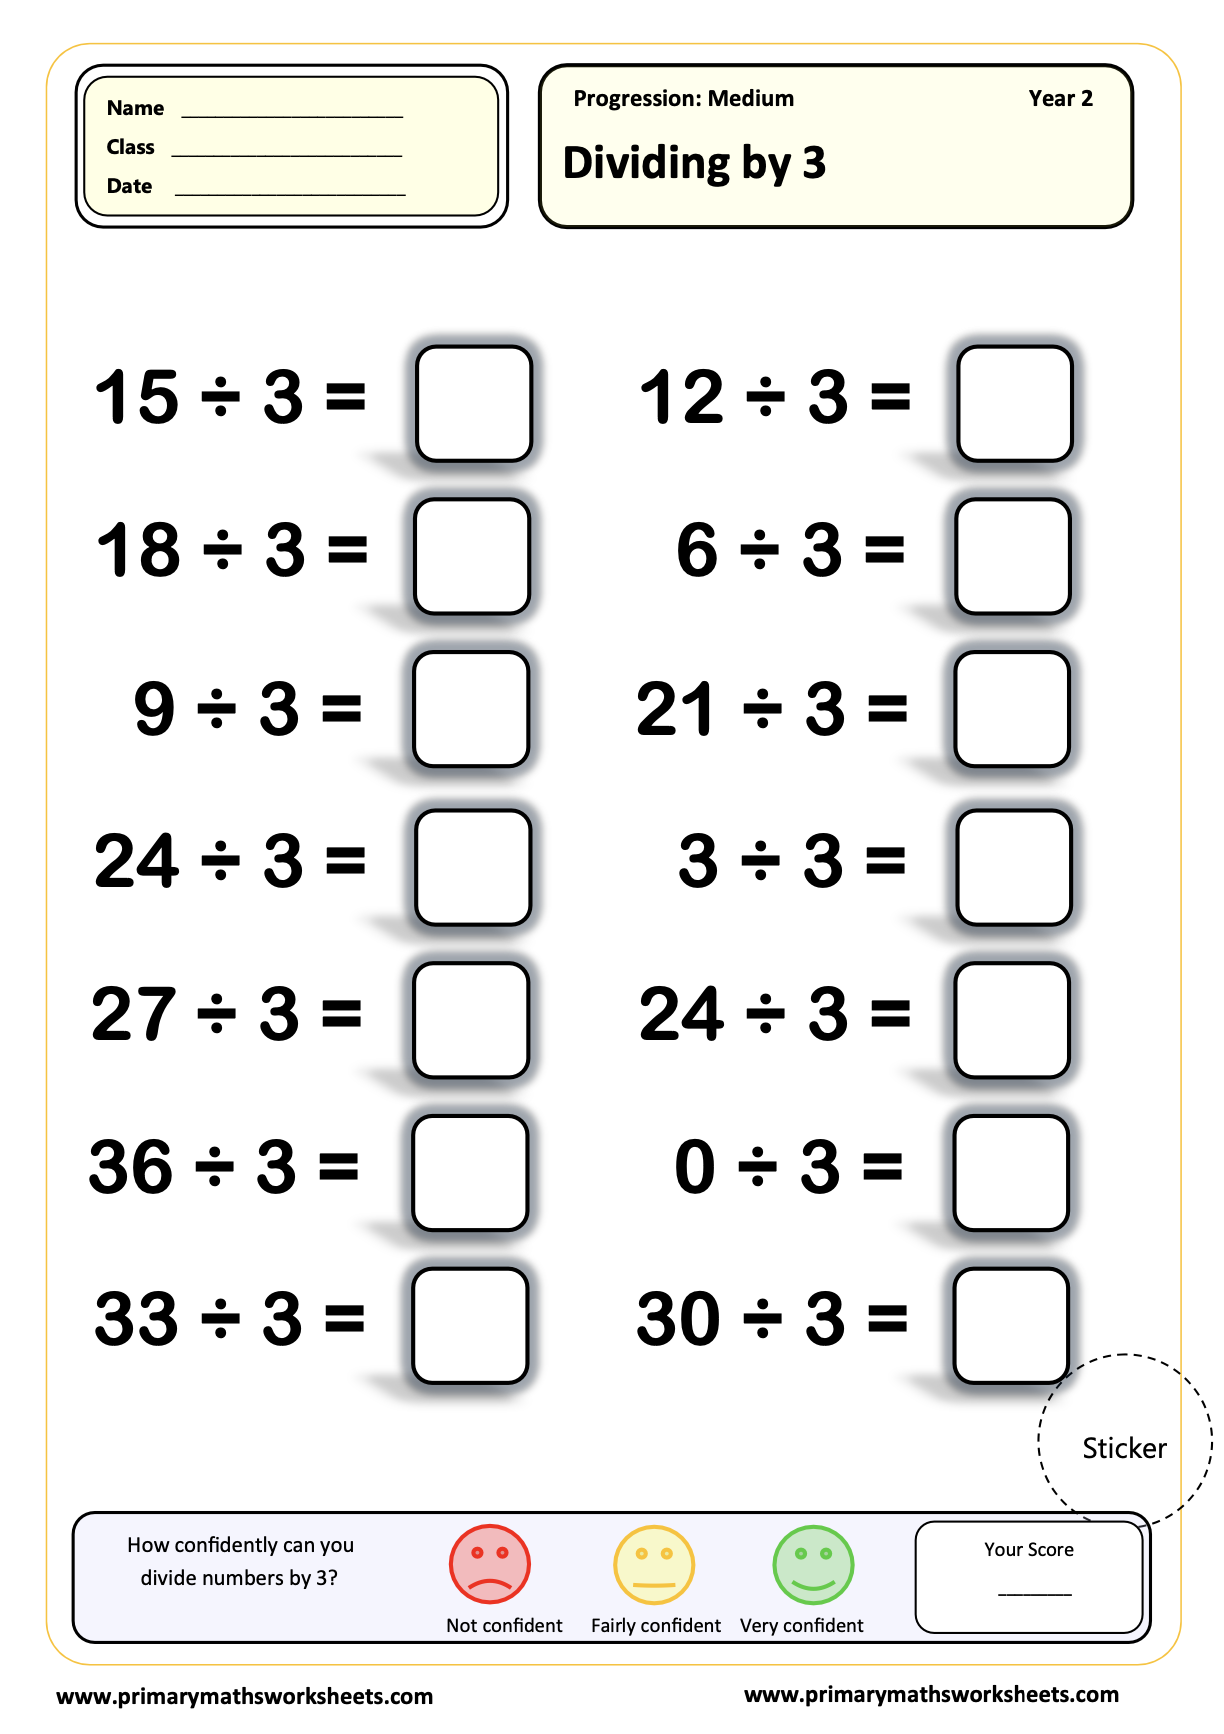 Year 2 Dividing by 3 Worksheet